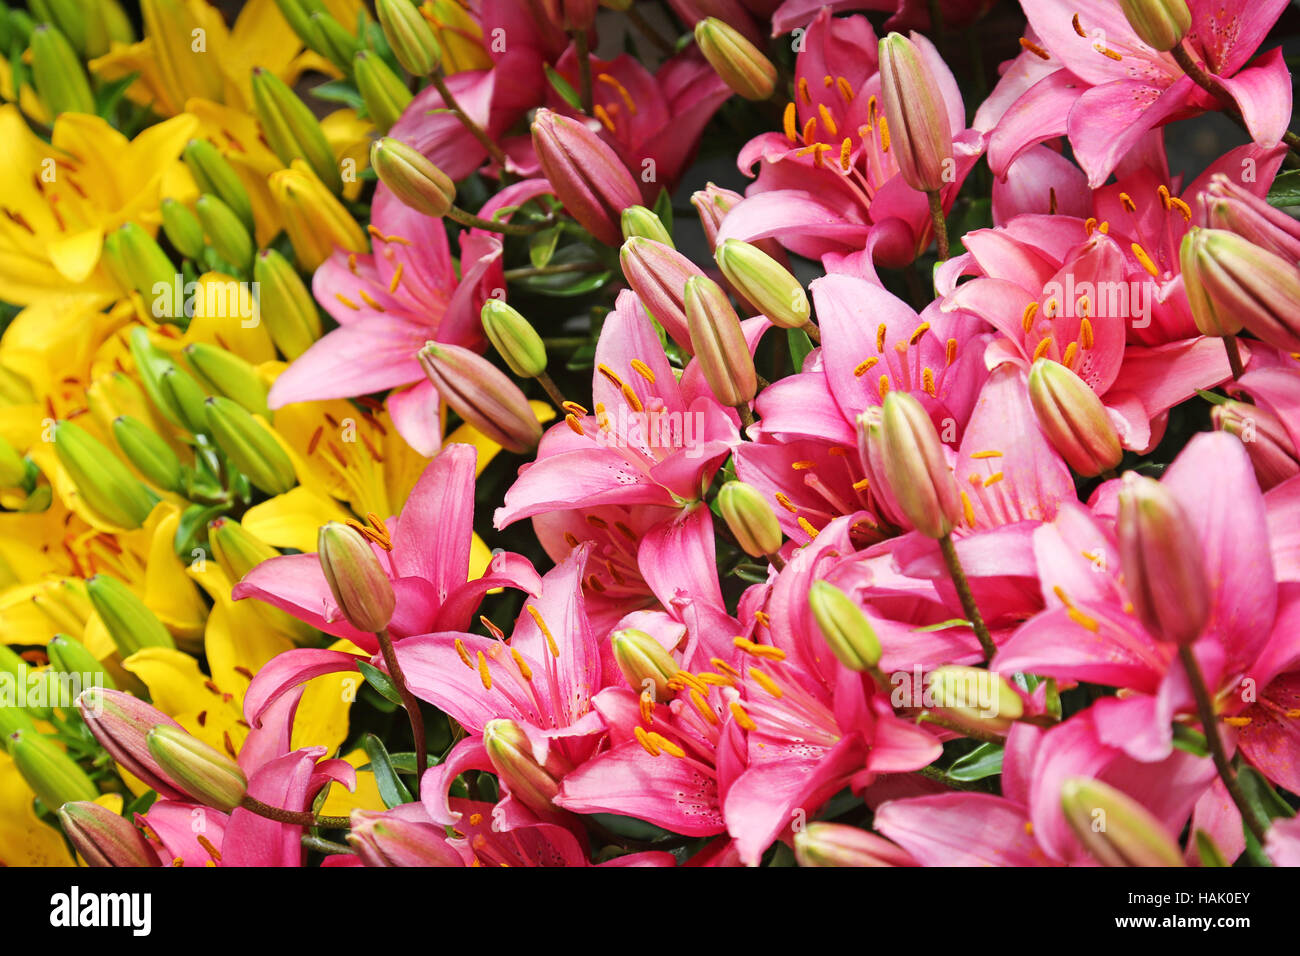 Close up of pink and yellow lily flowers Banque D'Images